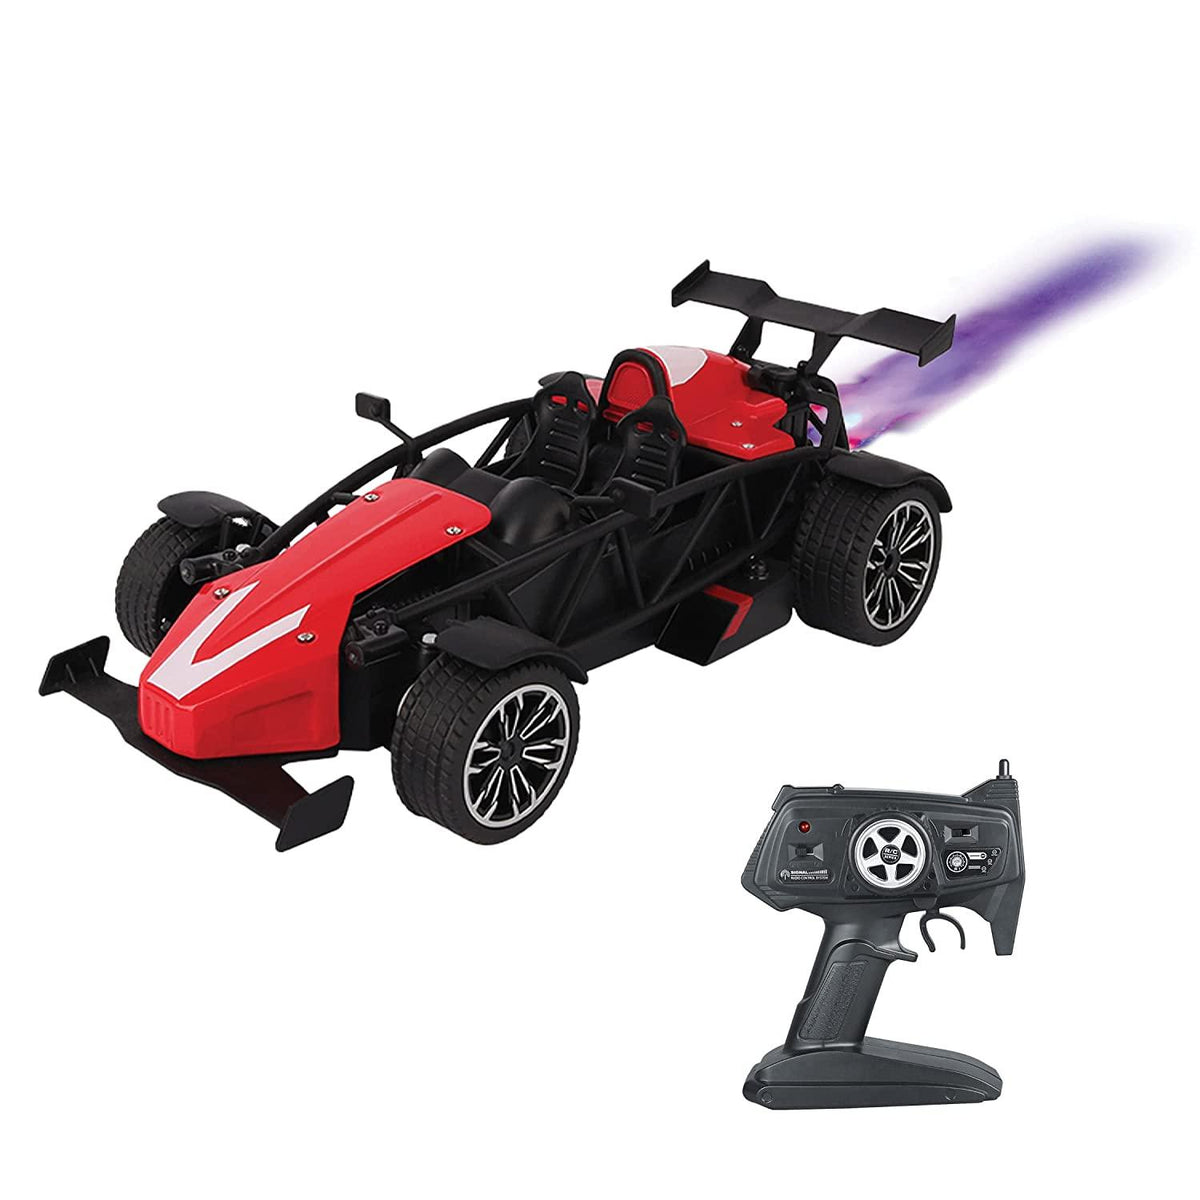 Playzu F1 Remote Control Die Cast With Mist Spray Racing Car – Red - FunCorp India